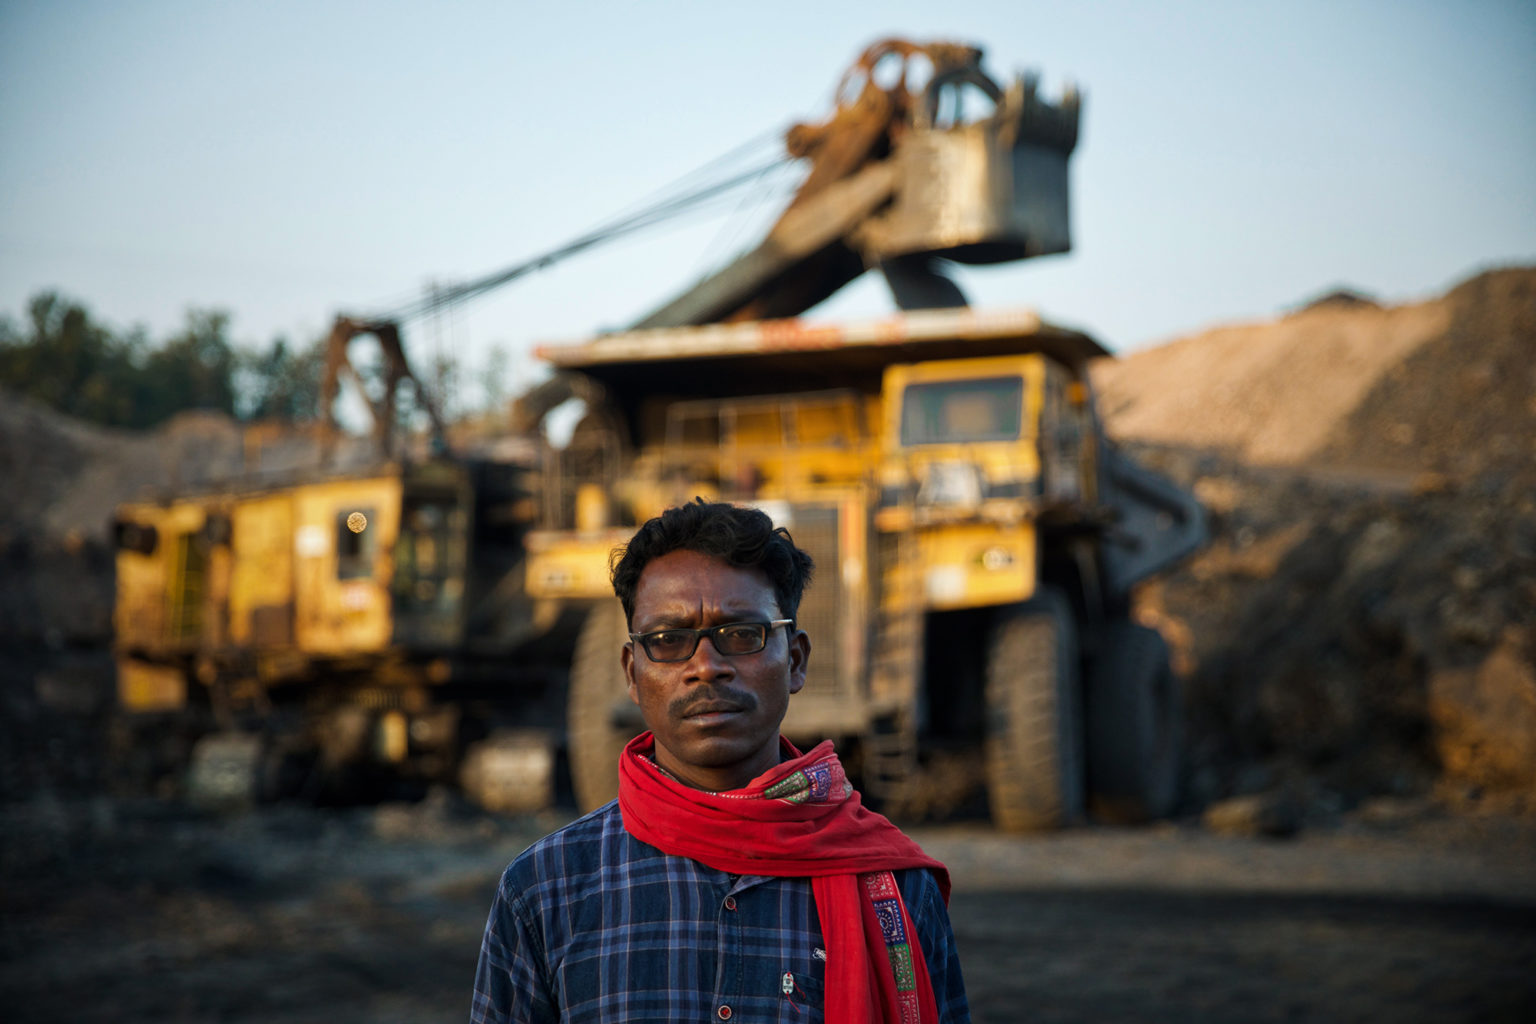 A photo of a man at a coal mining site